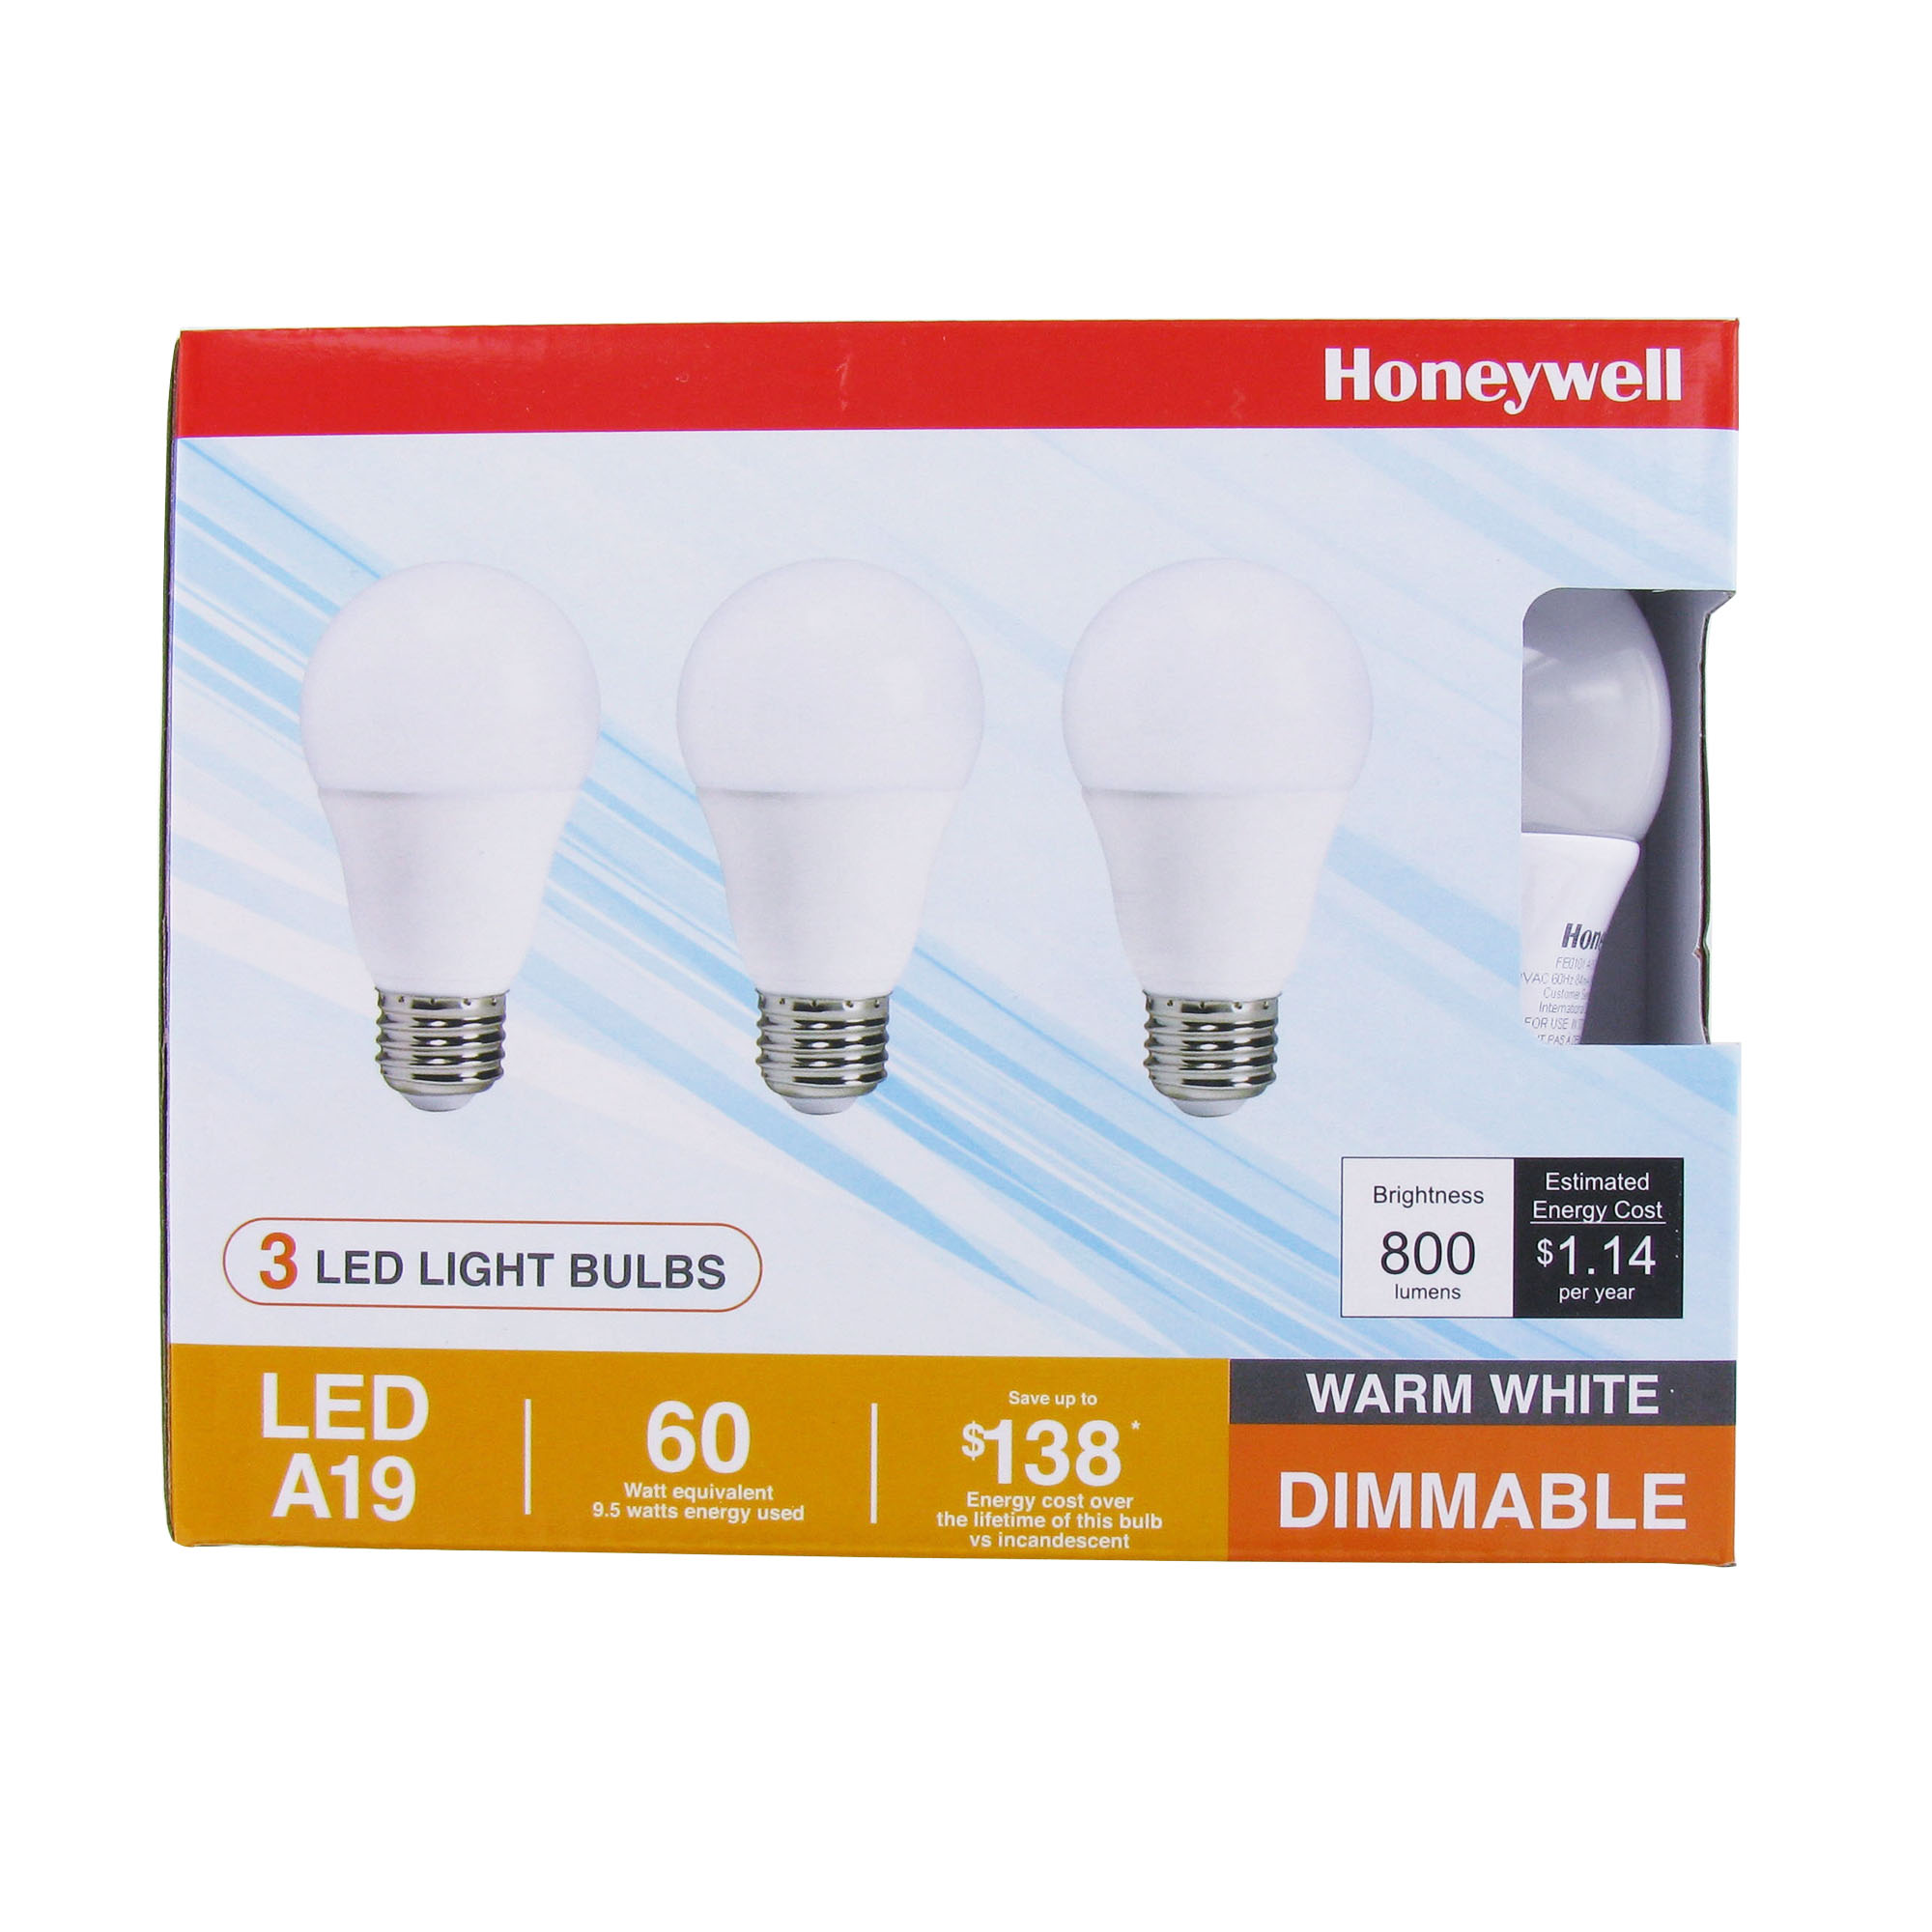 Honeywell 60W Equivalent A19 Dimmable LED Light Bulb - 3 Pack, FE0101